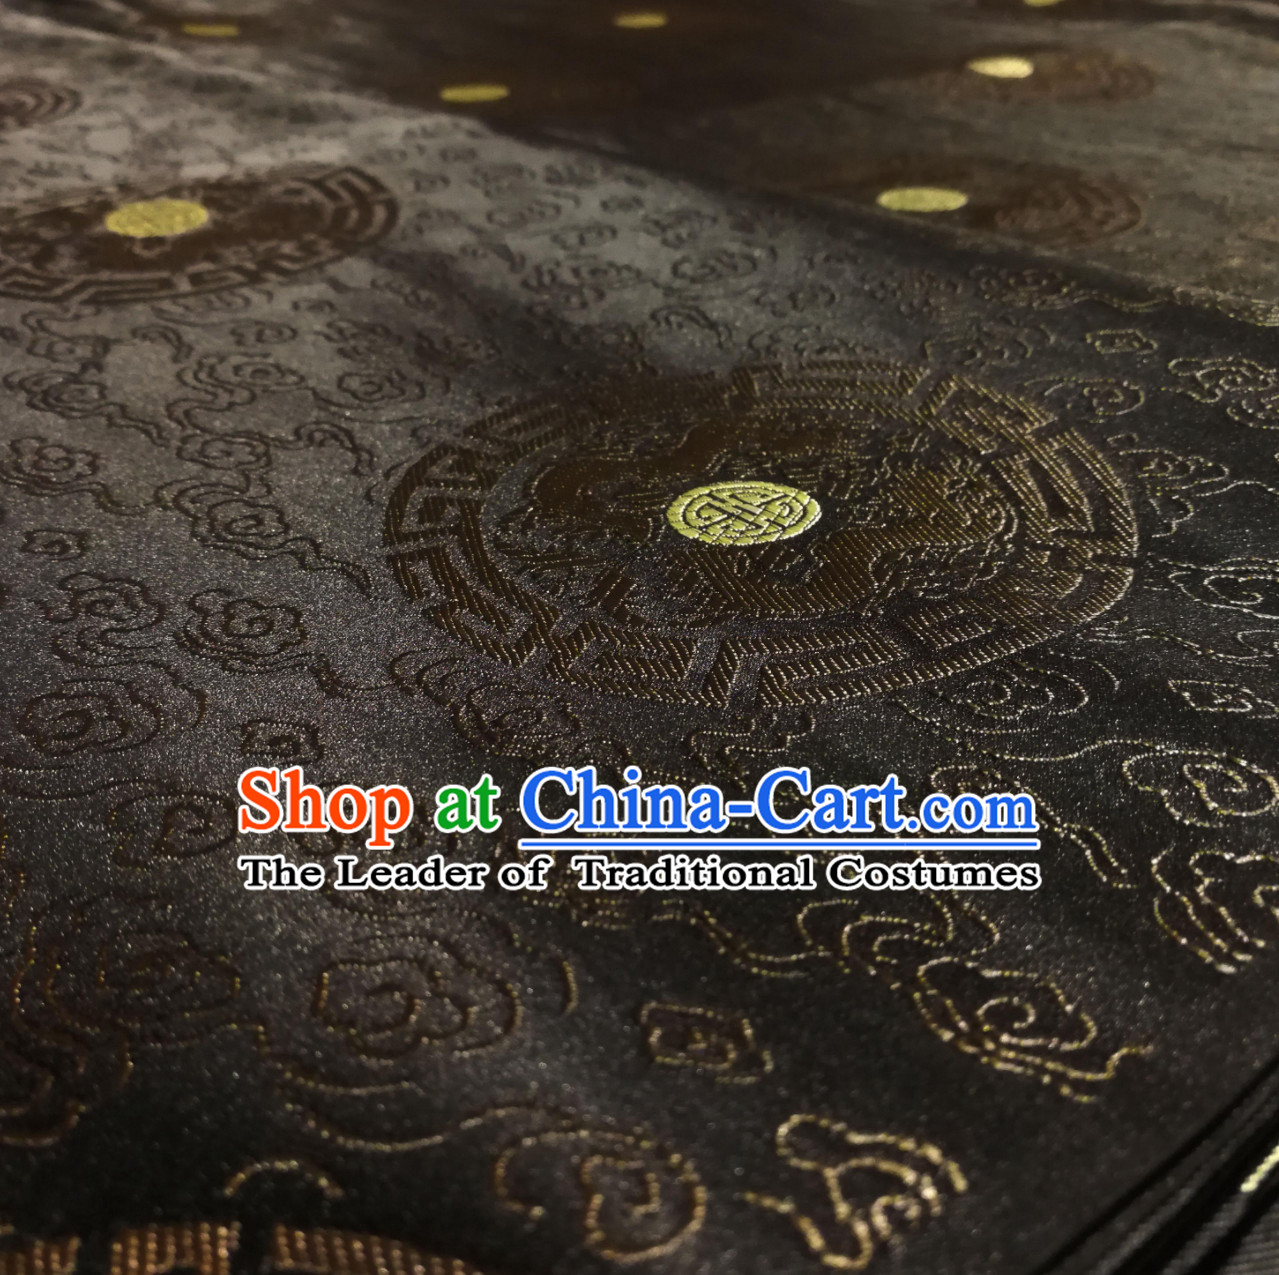 Black Color Chinese Royal Palace Style Traditional Round Dragon Pattern Design Brocade Fabric Silk Fabric Chinese Fabric Asian Material